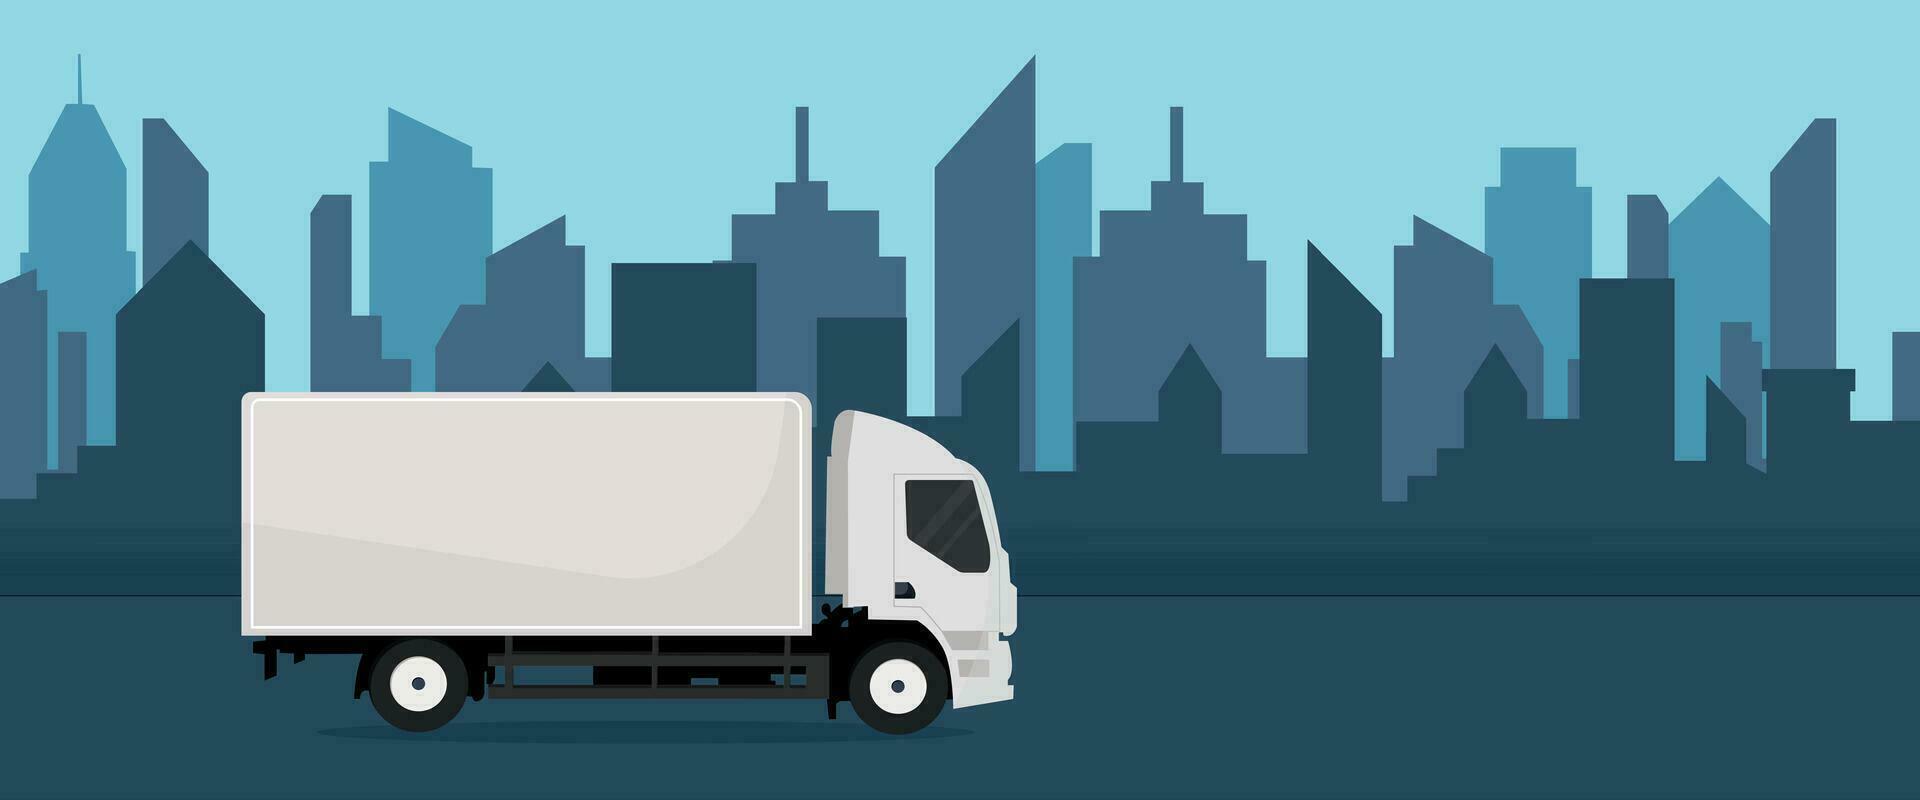 truck on the road vector